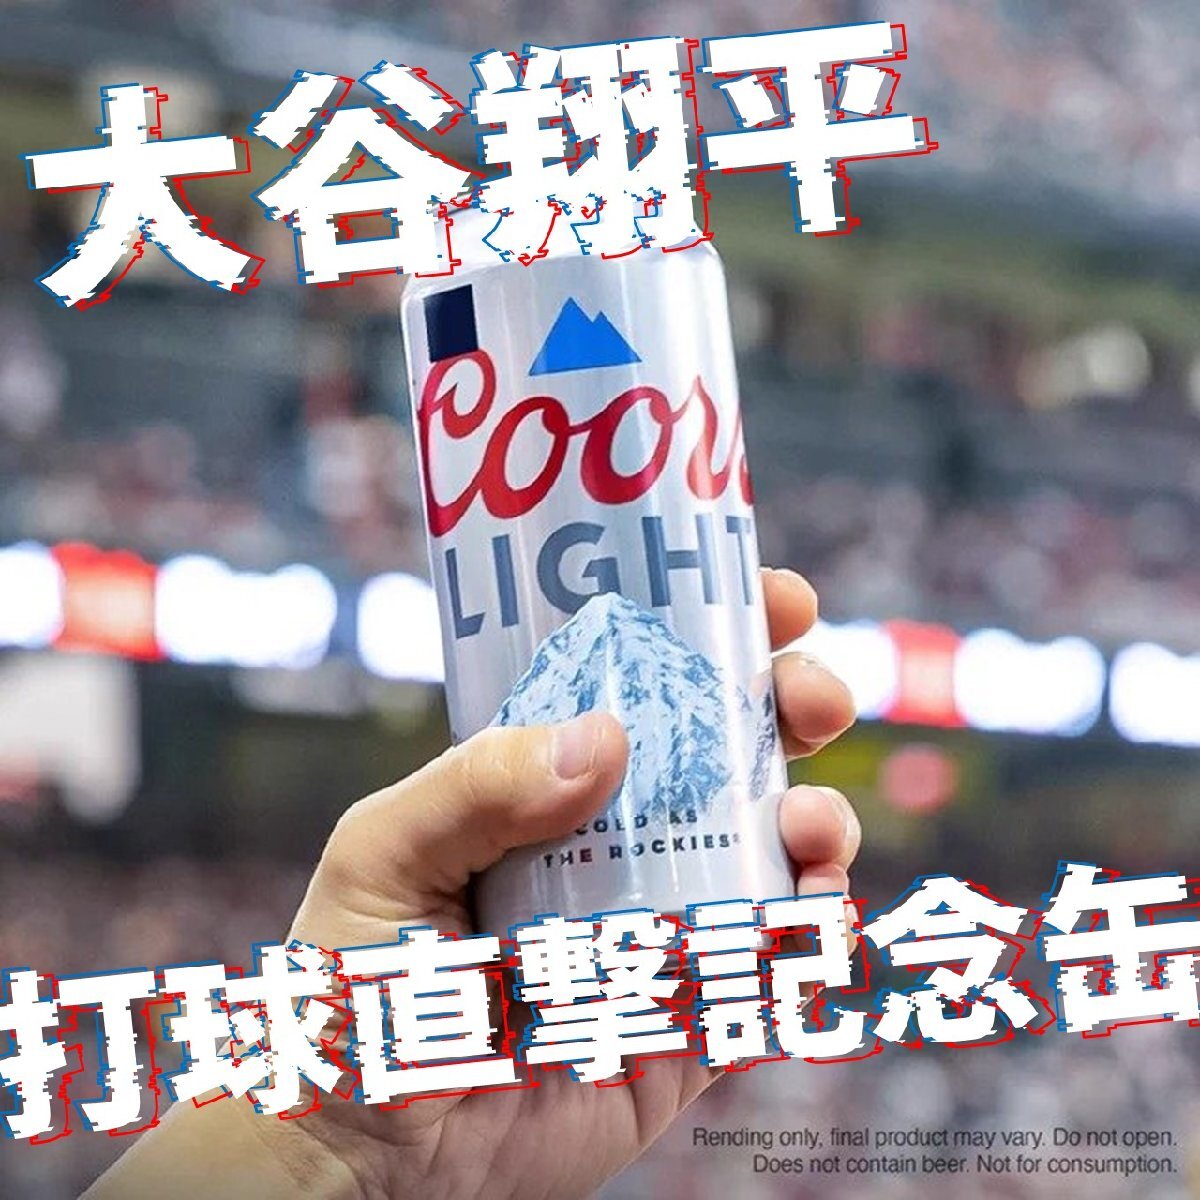 【MS】大谷翔平 記念グッズ 電光掲示板破壊 記念缶 クアーズライト HITS THE SPOT COMMEMORATIVE CAN ドジャース_画像1